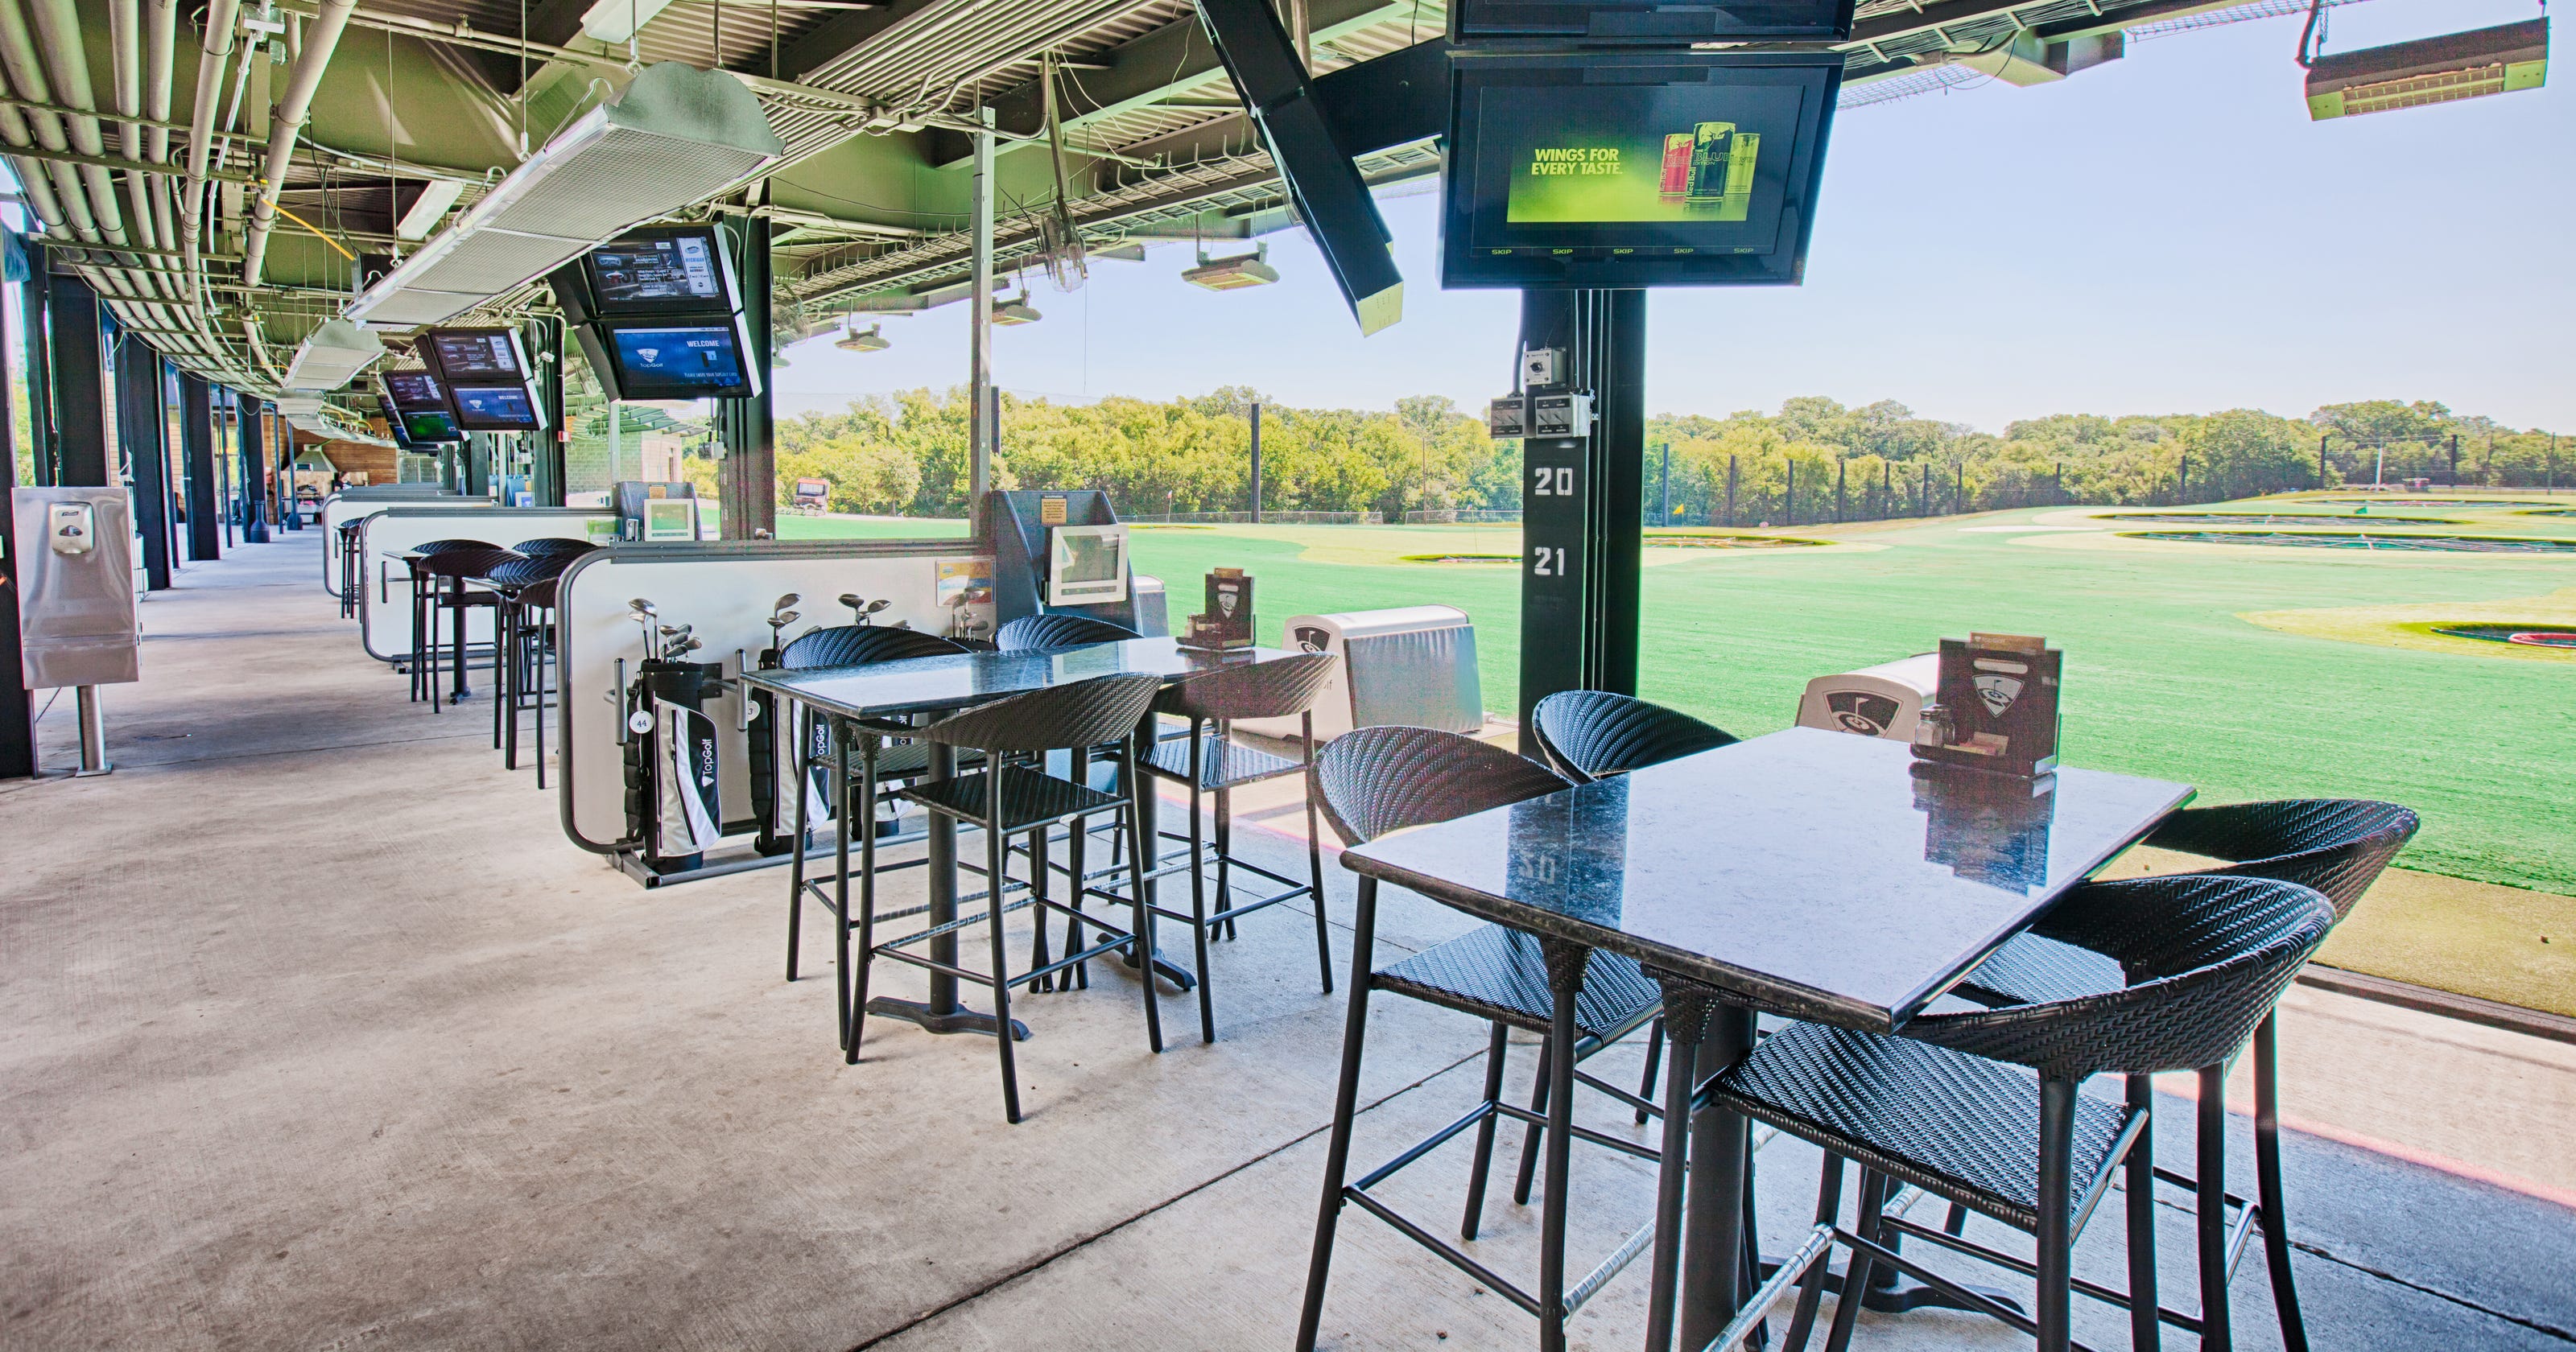 Fun food and atmosphere at Topgolf